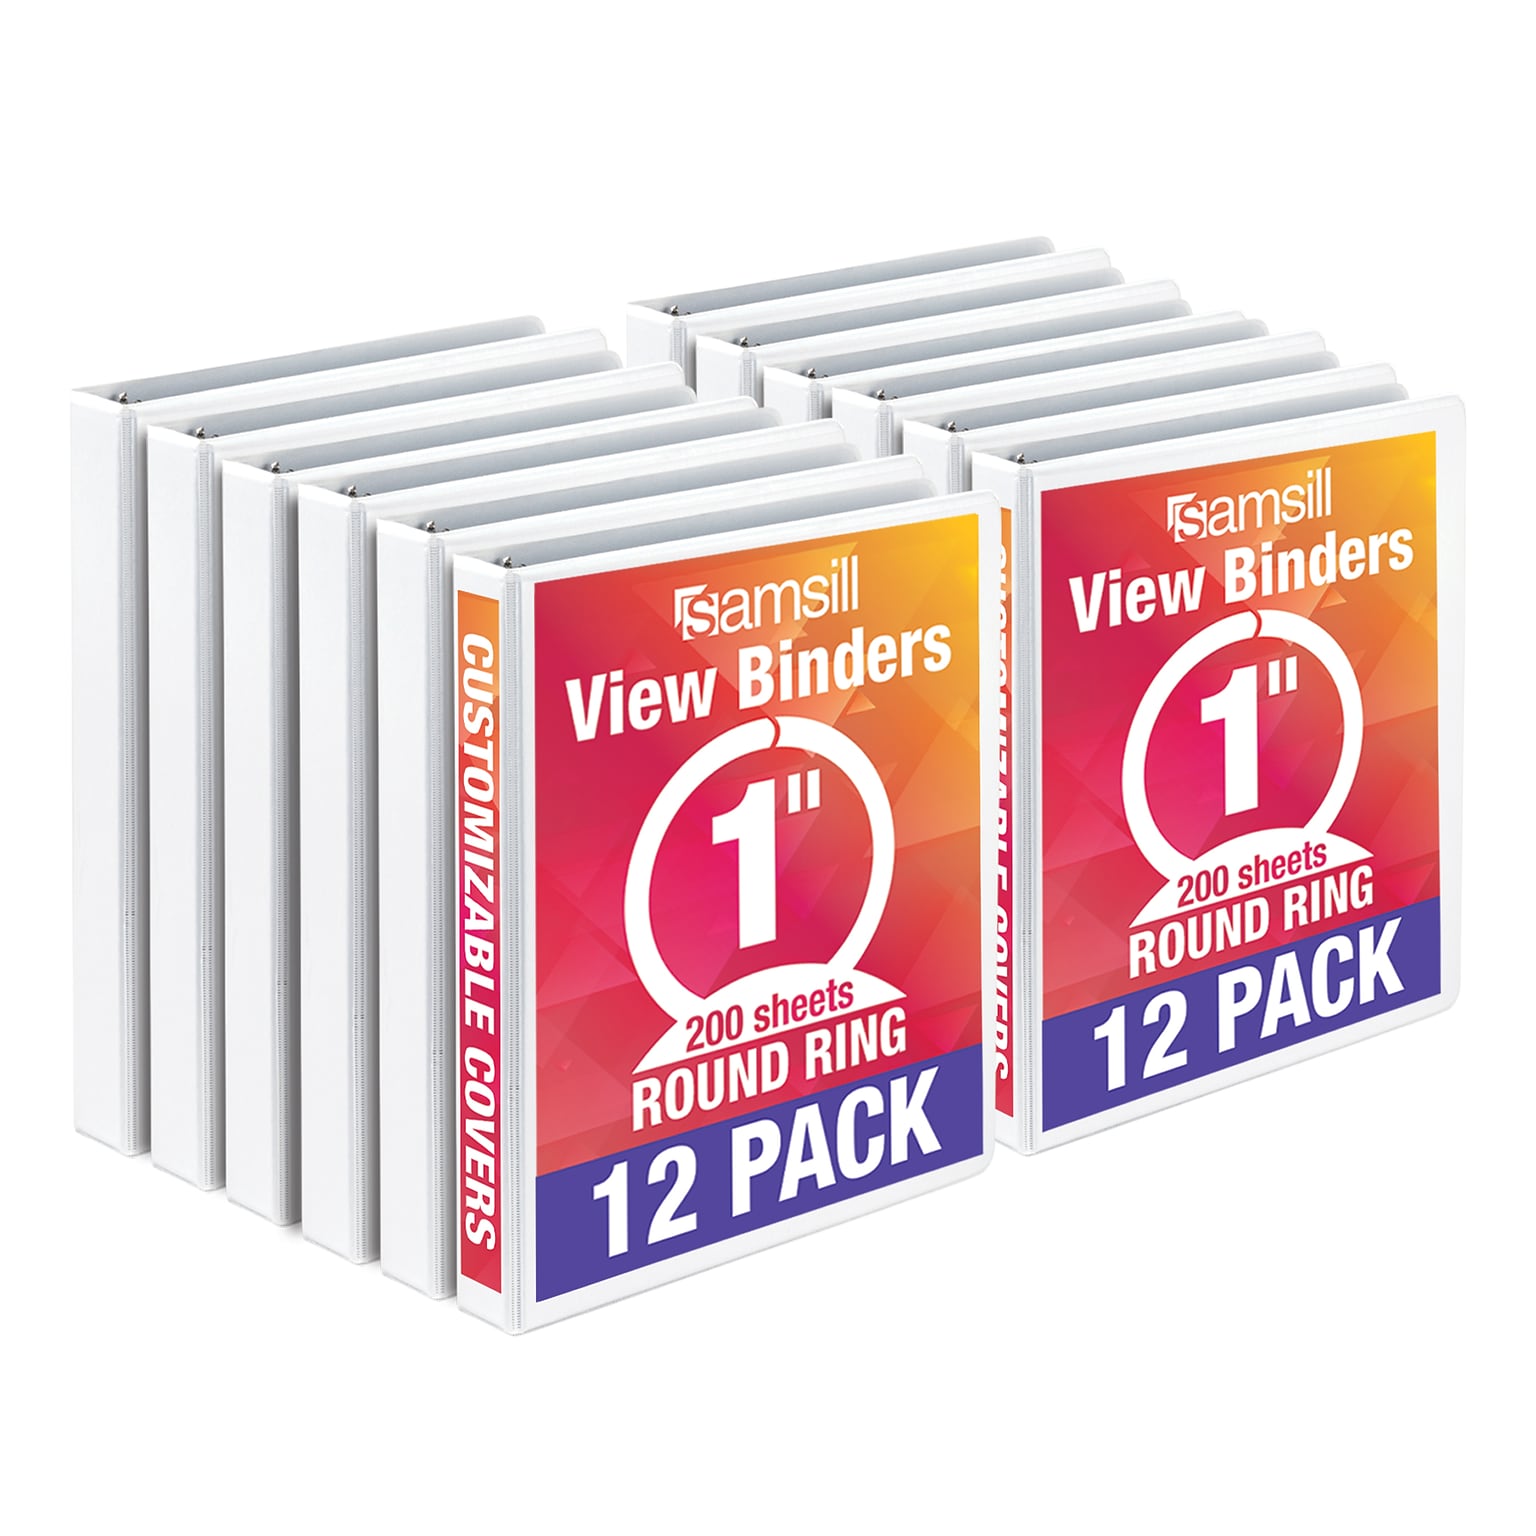 Samsill 1 3-Ring View Binders, White, 12/Pack (I008537C)